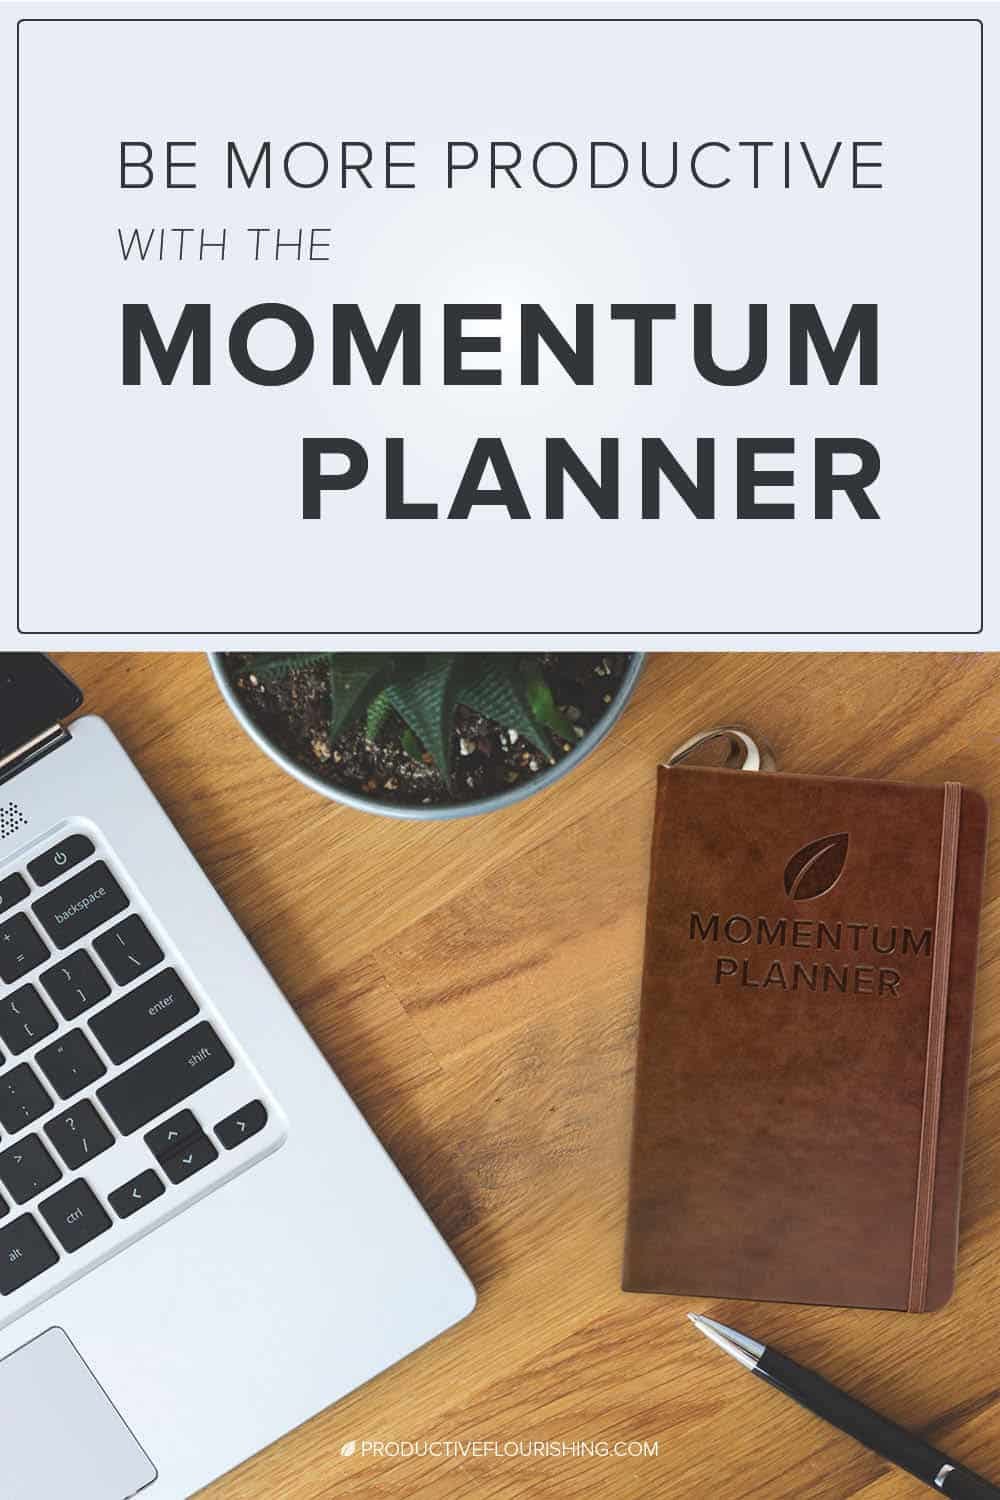 How does writing down your goals and tasks in a hardback planner add value to your planning process over using a purely digital planner? Learn how to be more productive with the Momentum Planner. #businessproductivity #entrepreneurplanner #productiveflourishing